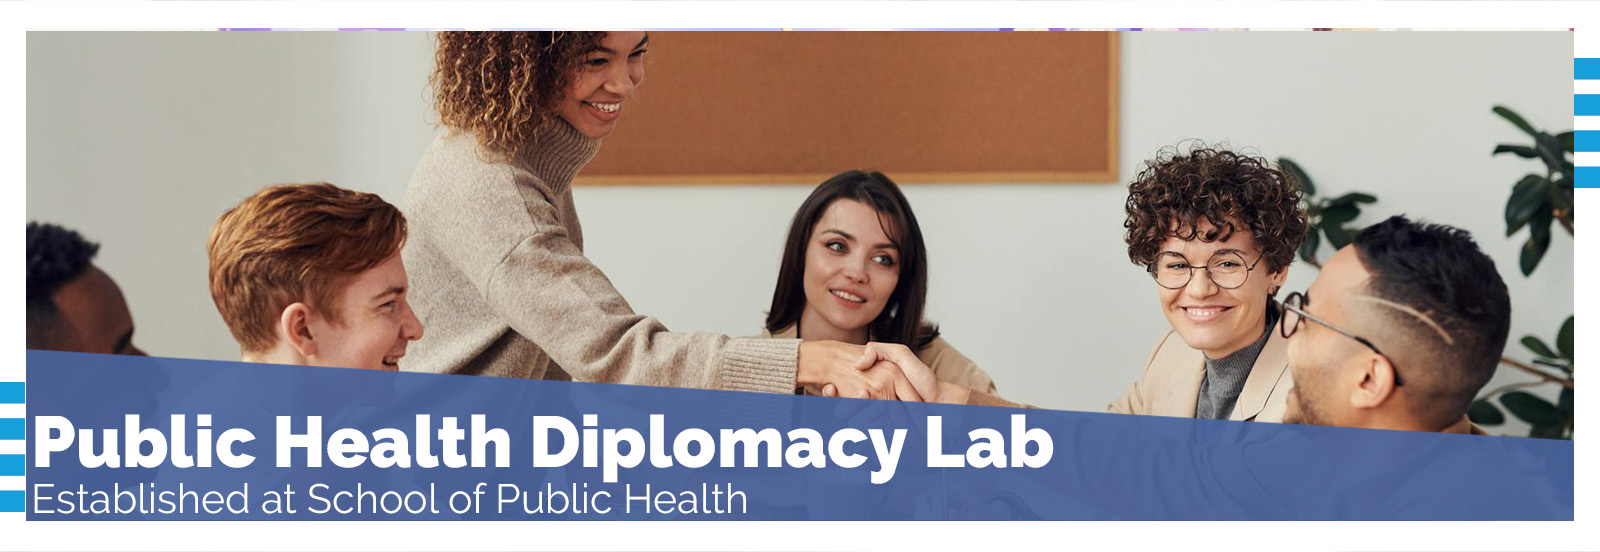 People in public health diplomacy lab